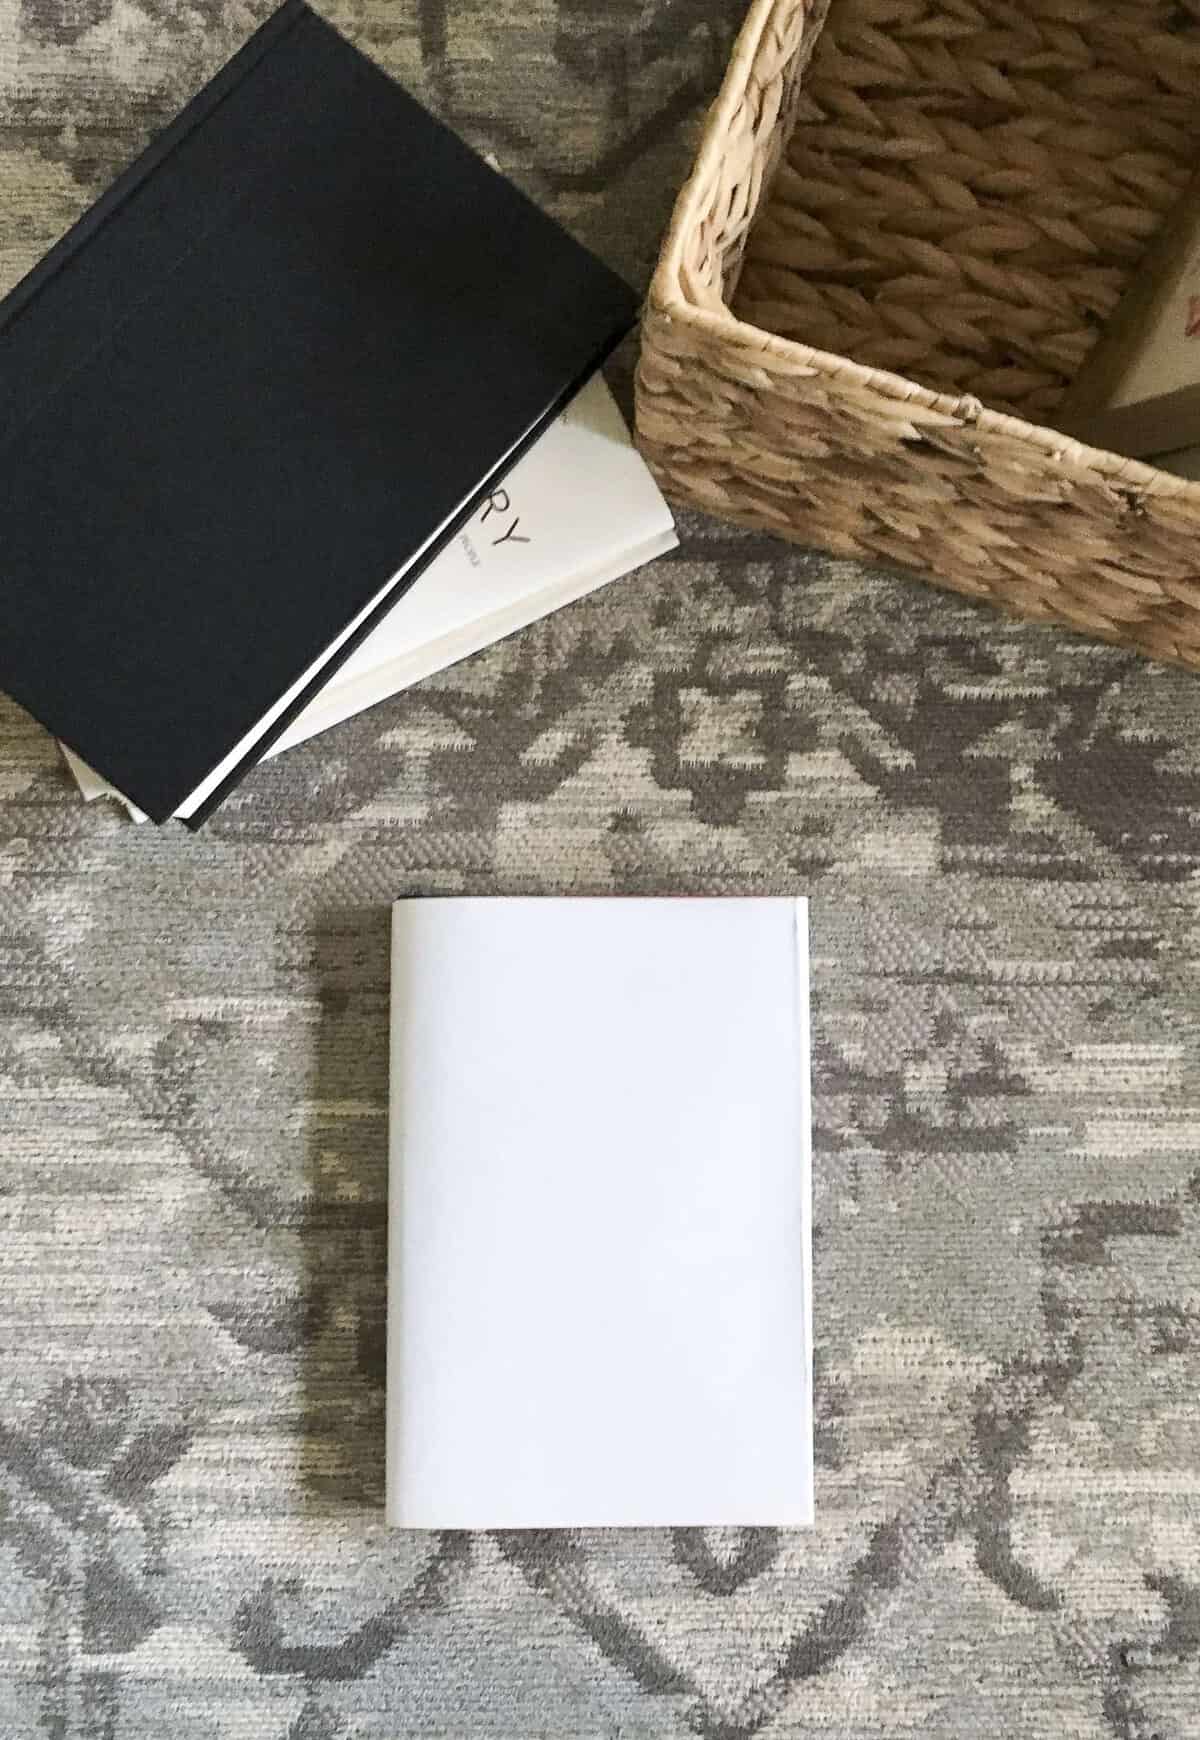 Do you want to make your book shelves look cohesive? I've got the simplest and easiest DIY book covers you've ever done up on the blog for you today.